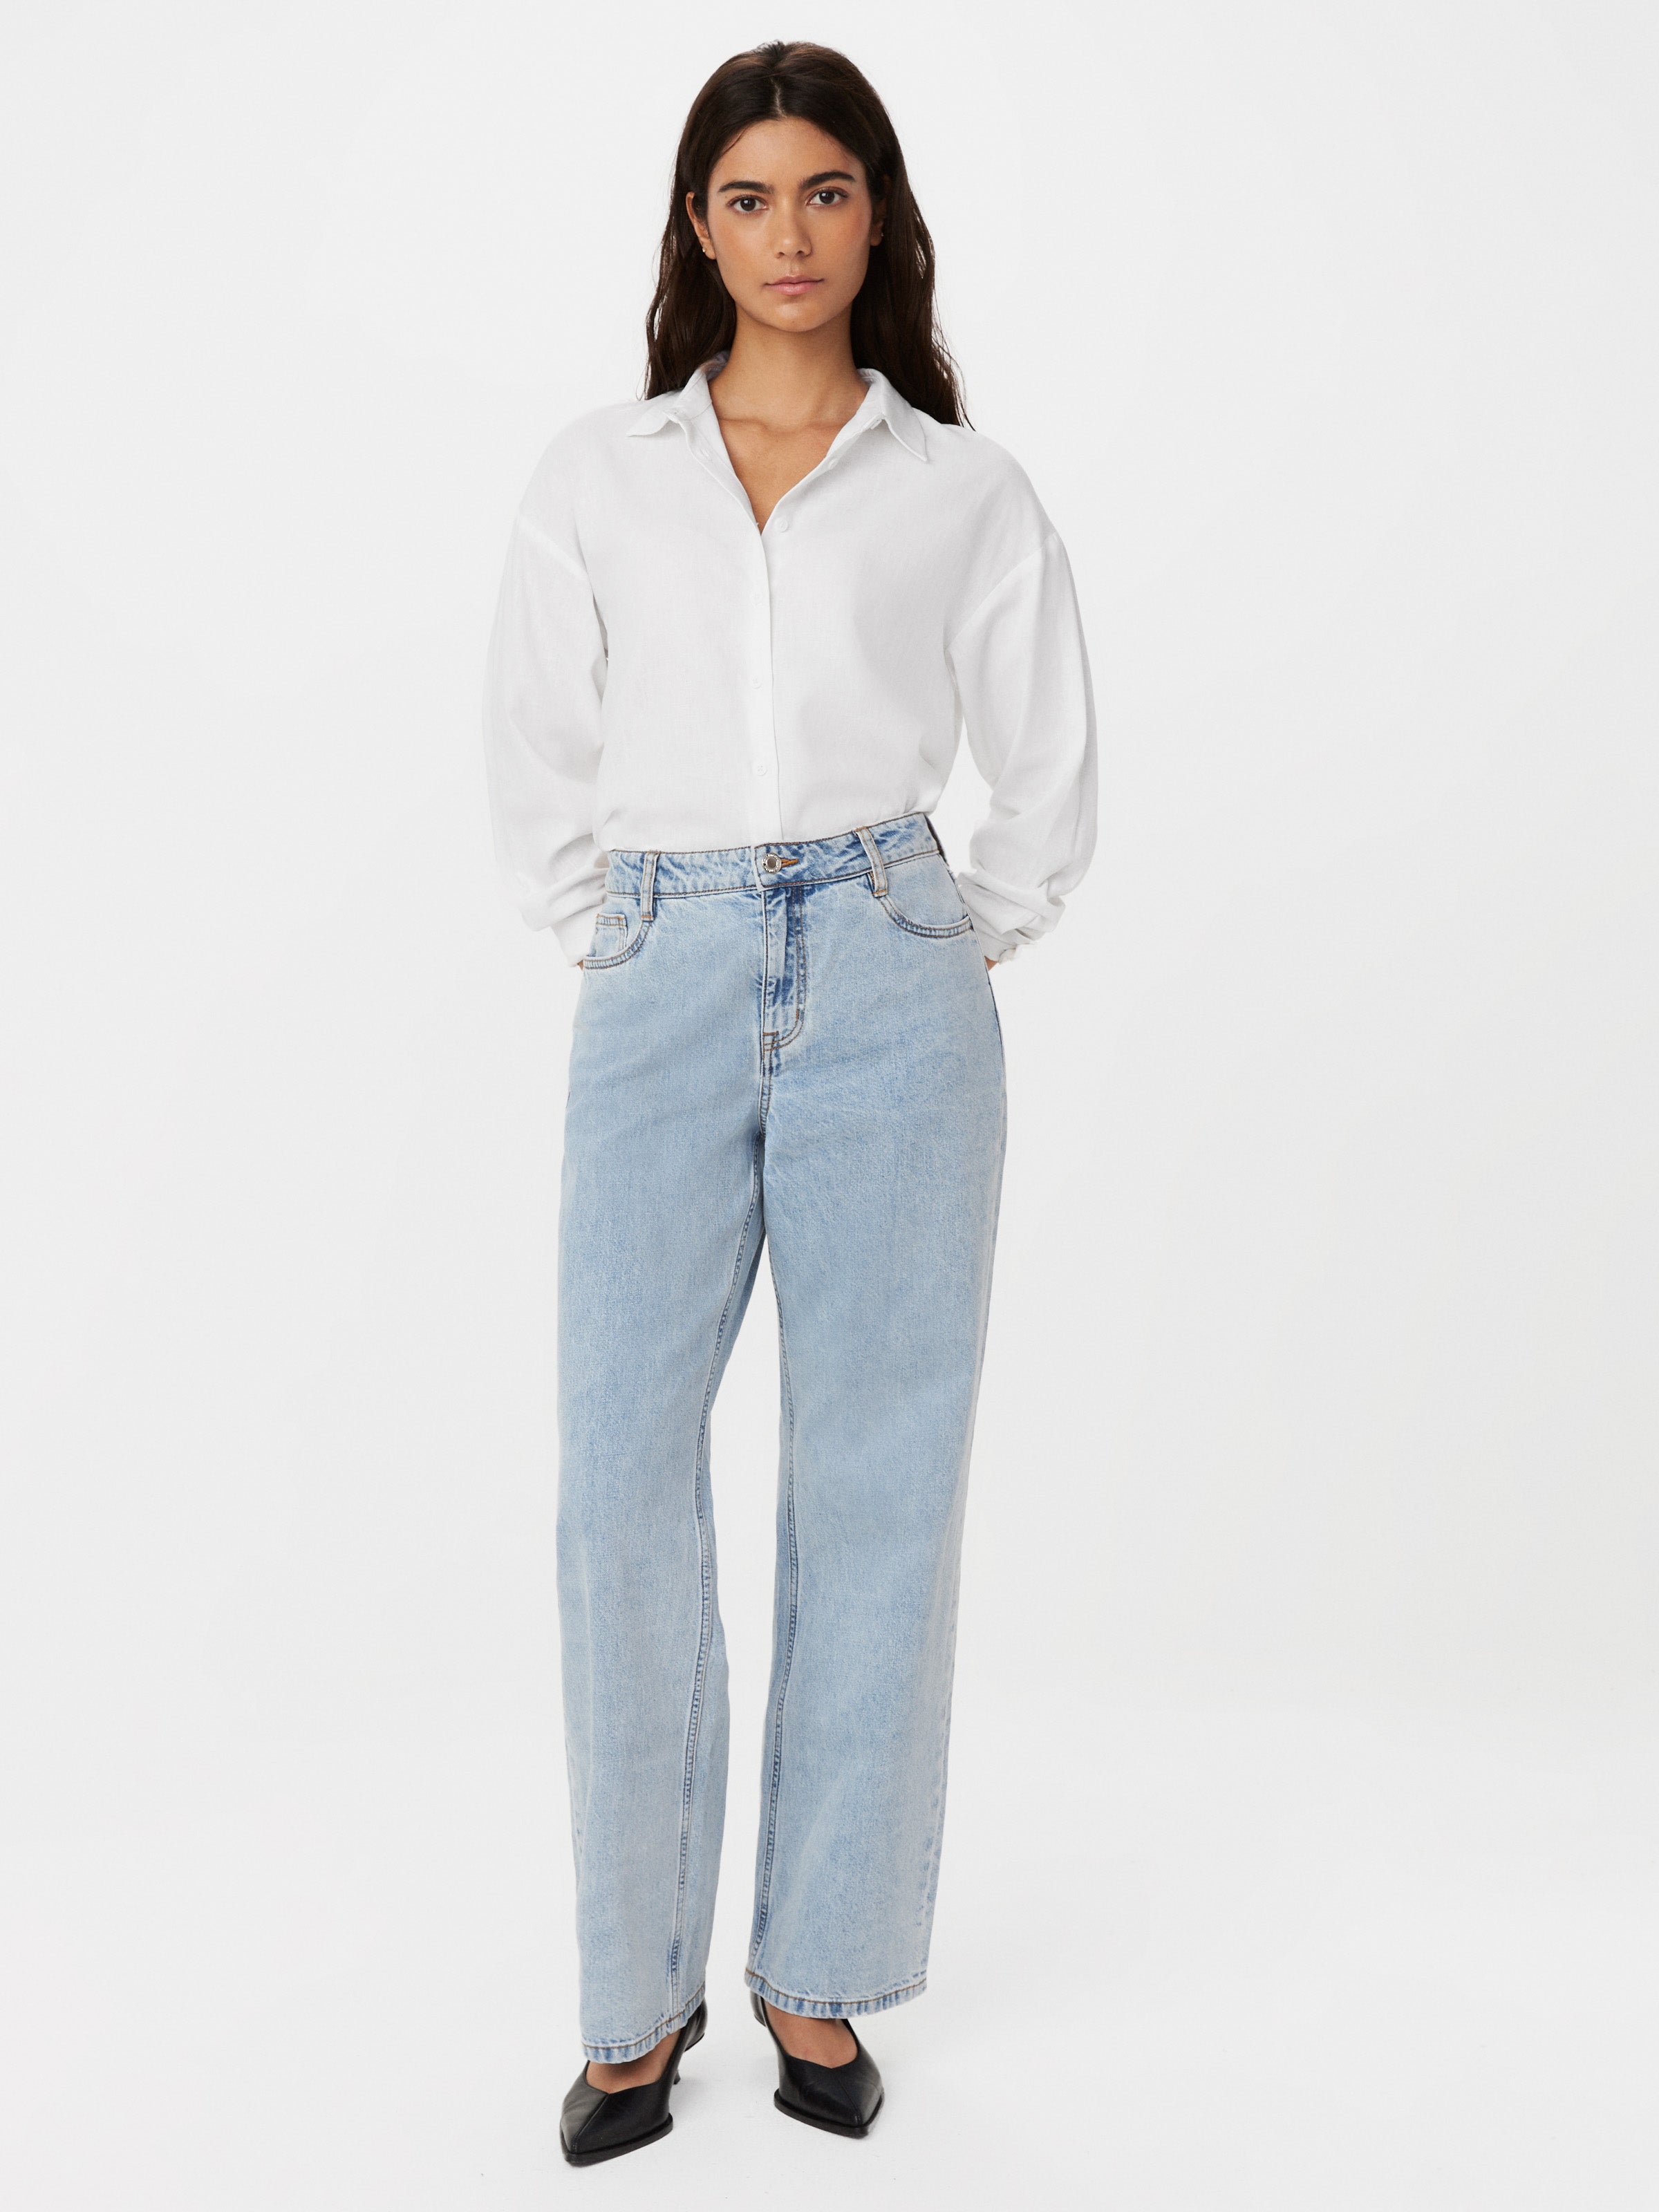 The Linen Long Sleeve Shirt in Bright White – Frank And Oak Canada